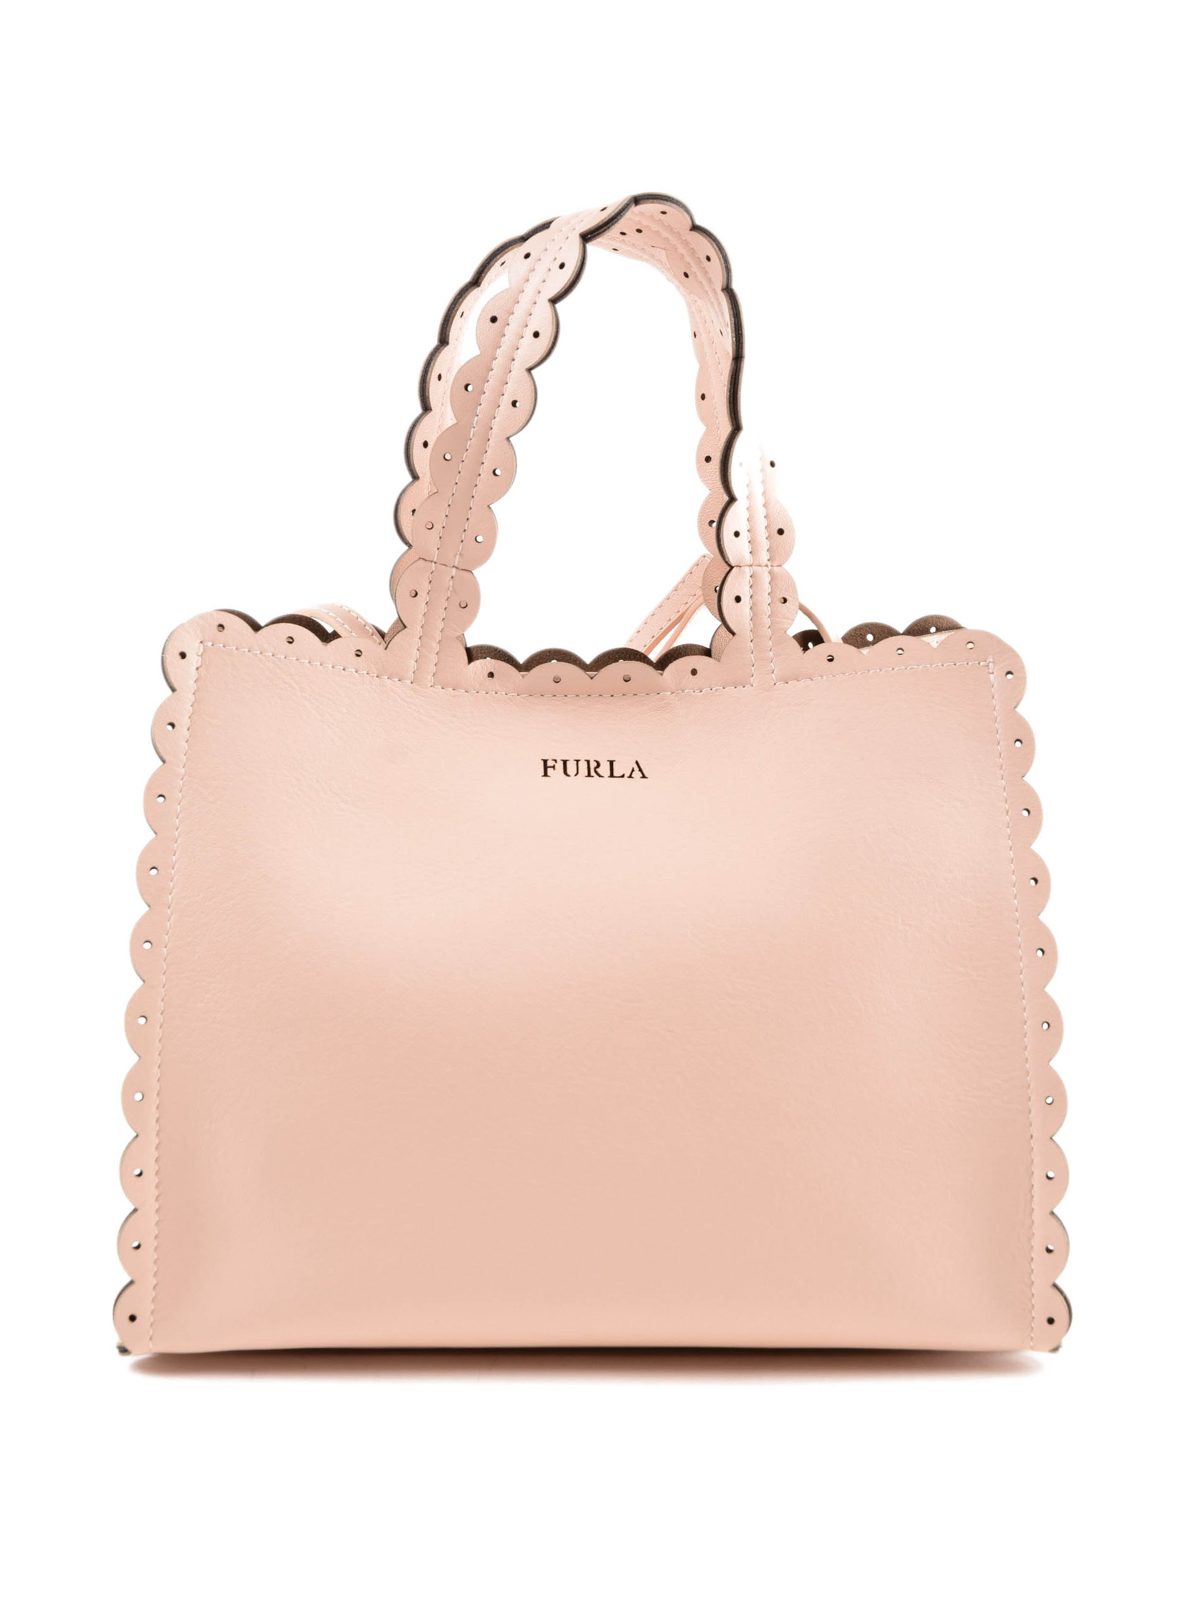 Furla - Merletto S pale pink leather tote - totes bags - 941710